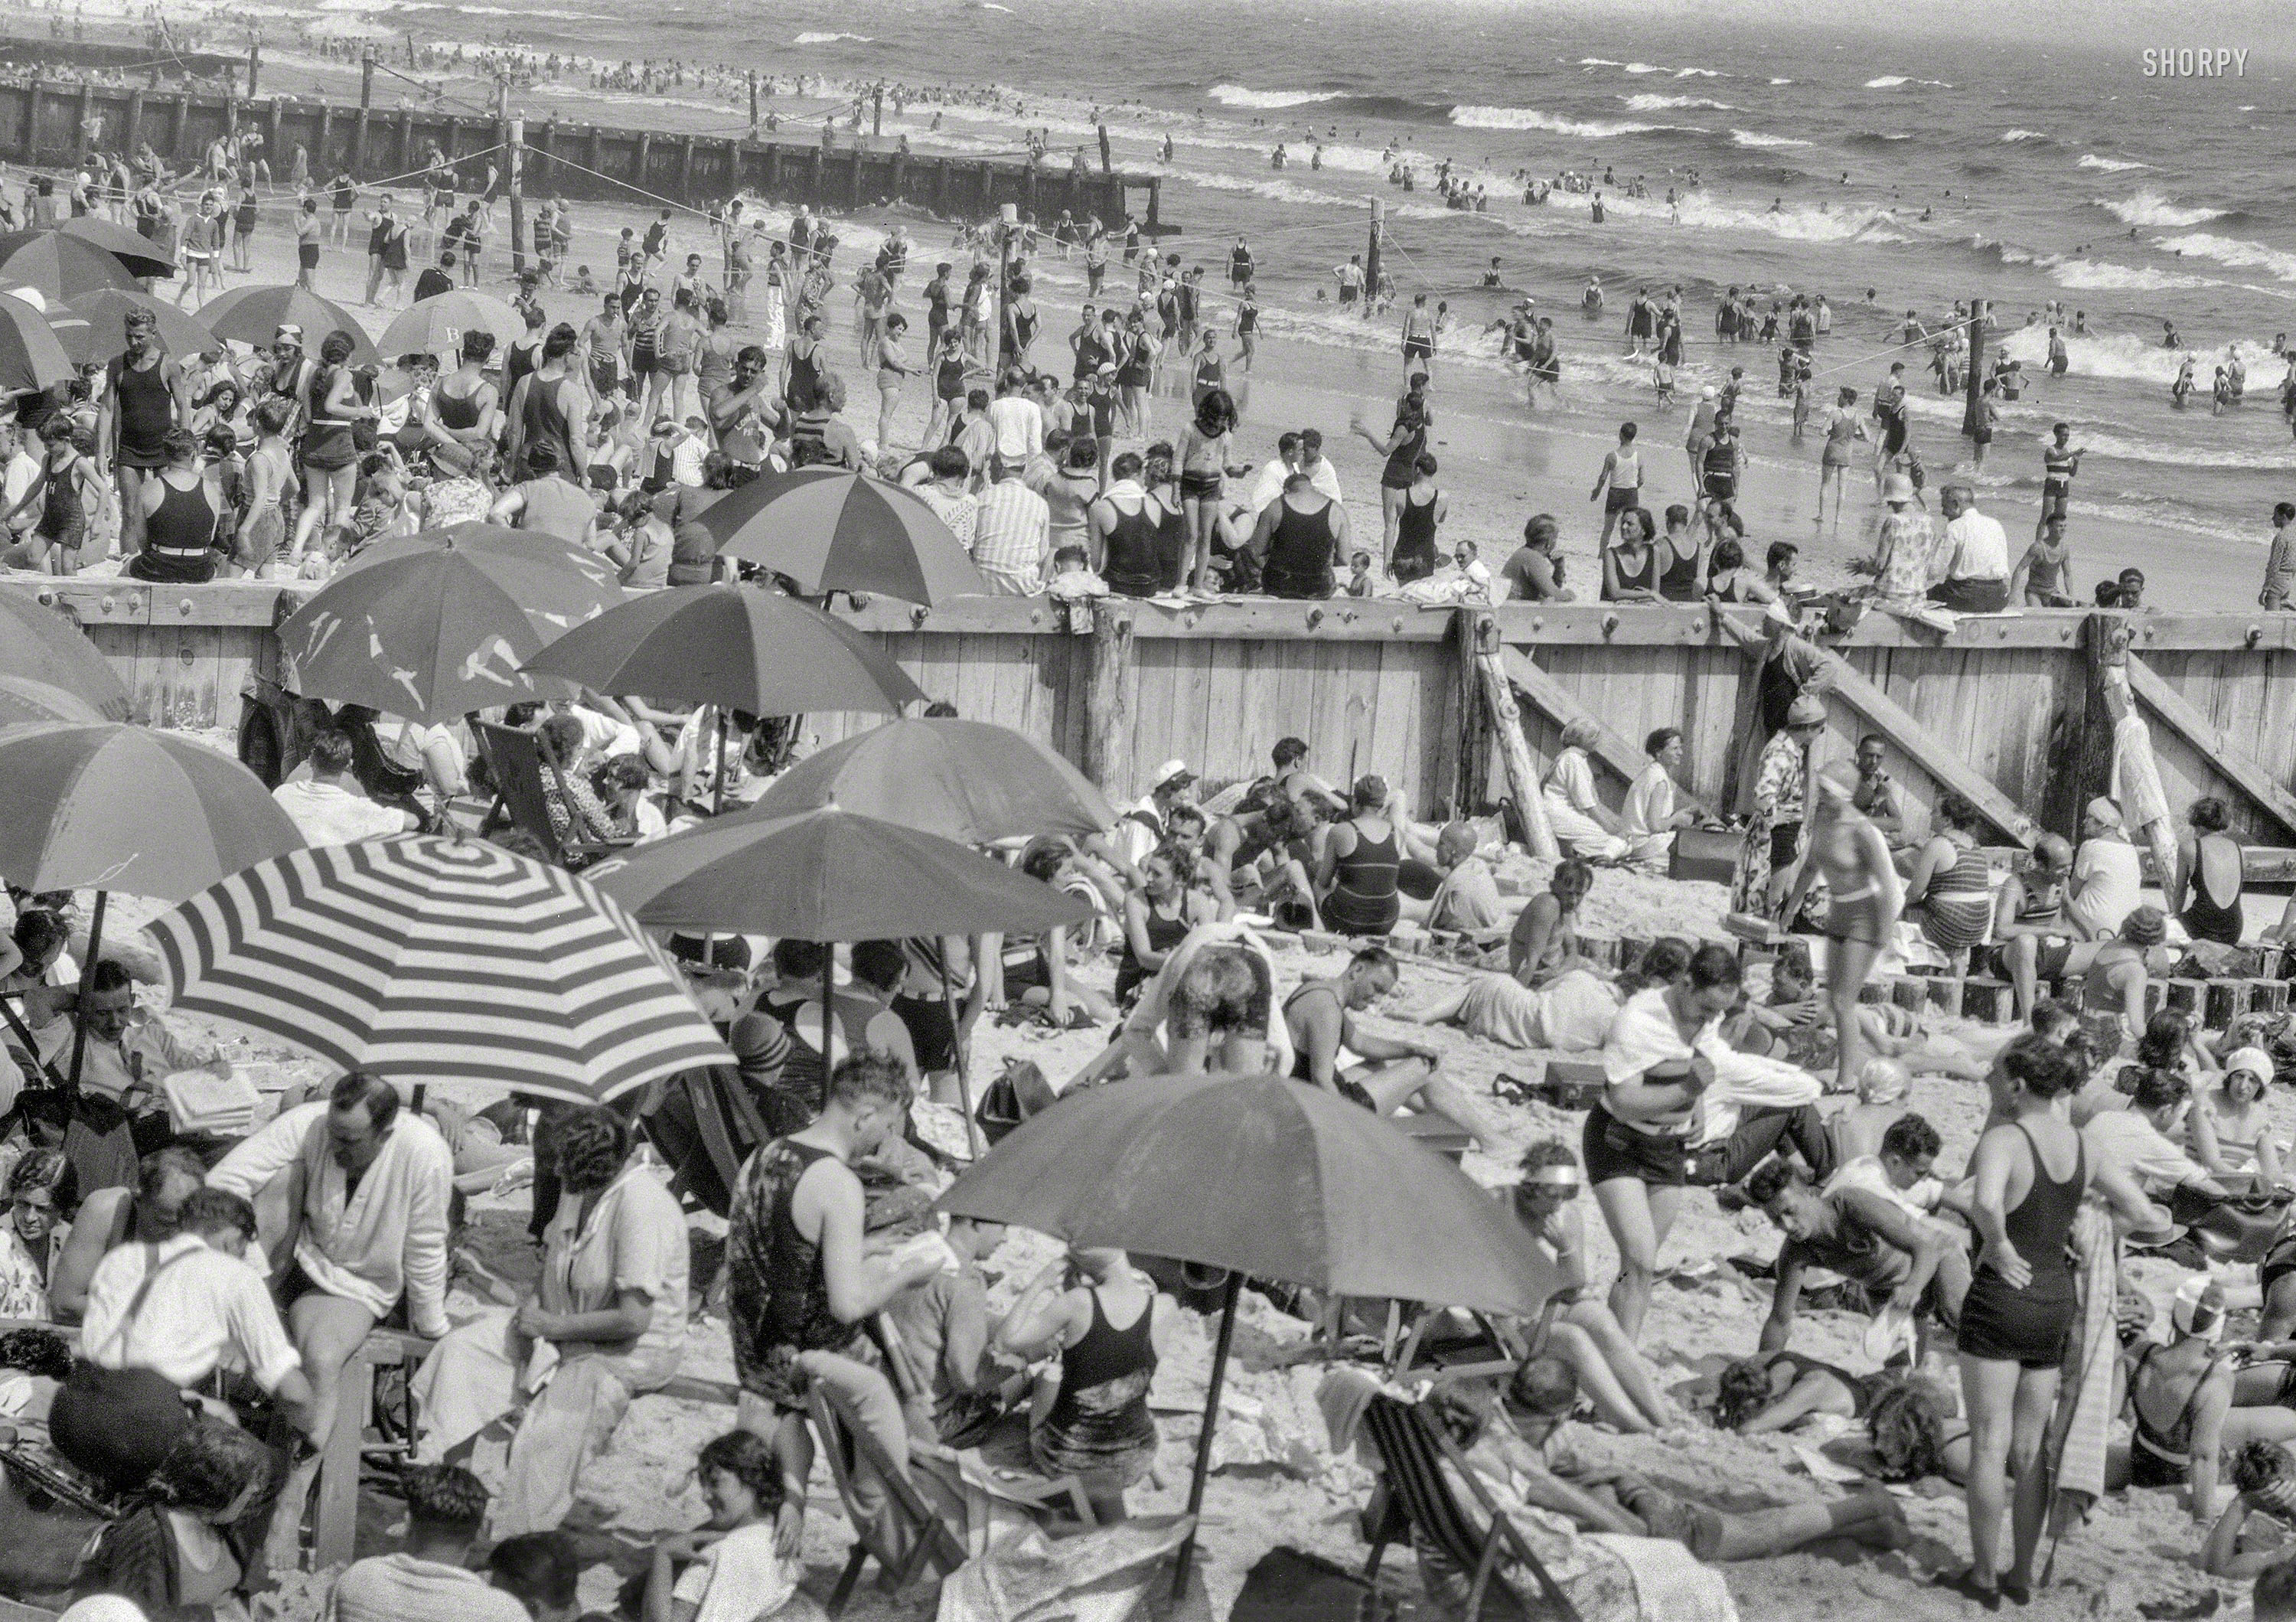 Summer 1927. "New York City views -- Long Beach." Raw material for a Gluyas Williams or Roz Chast. 4x5 nitrate negative by Arnold Genthe. View full size.